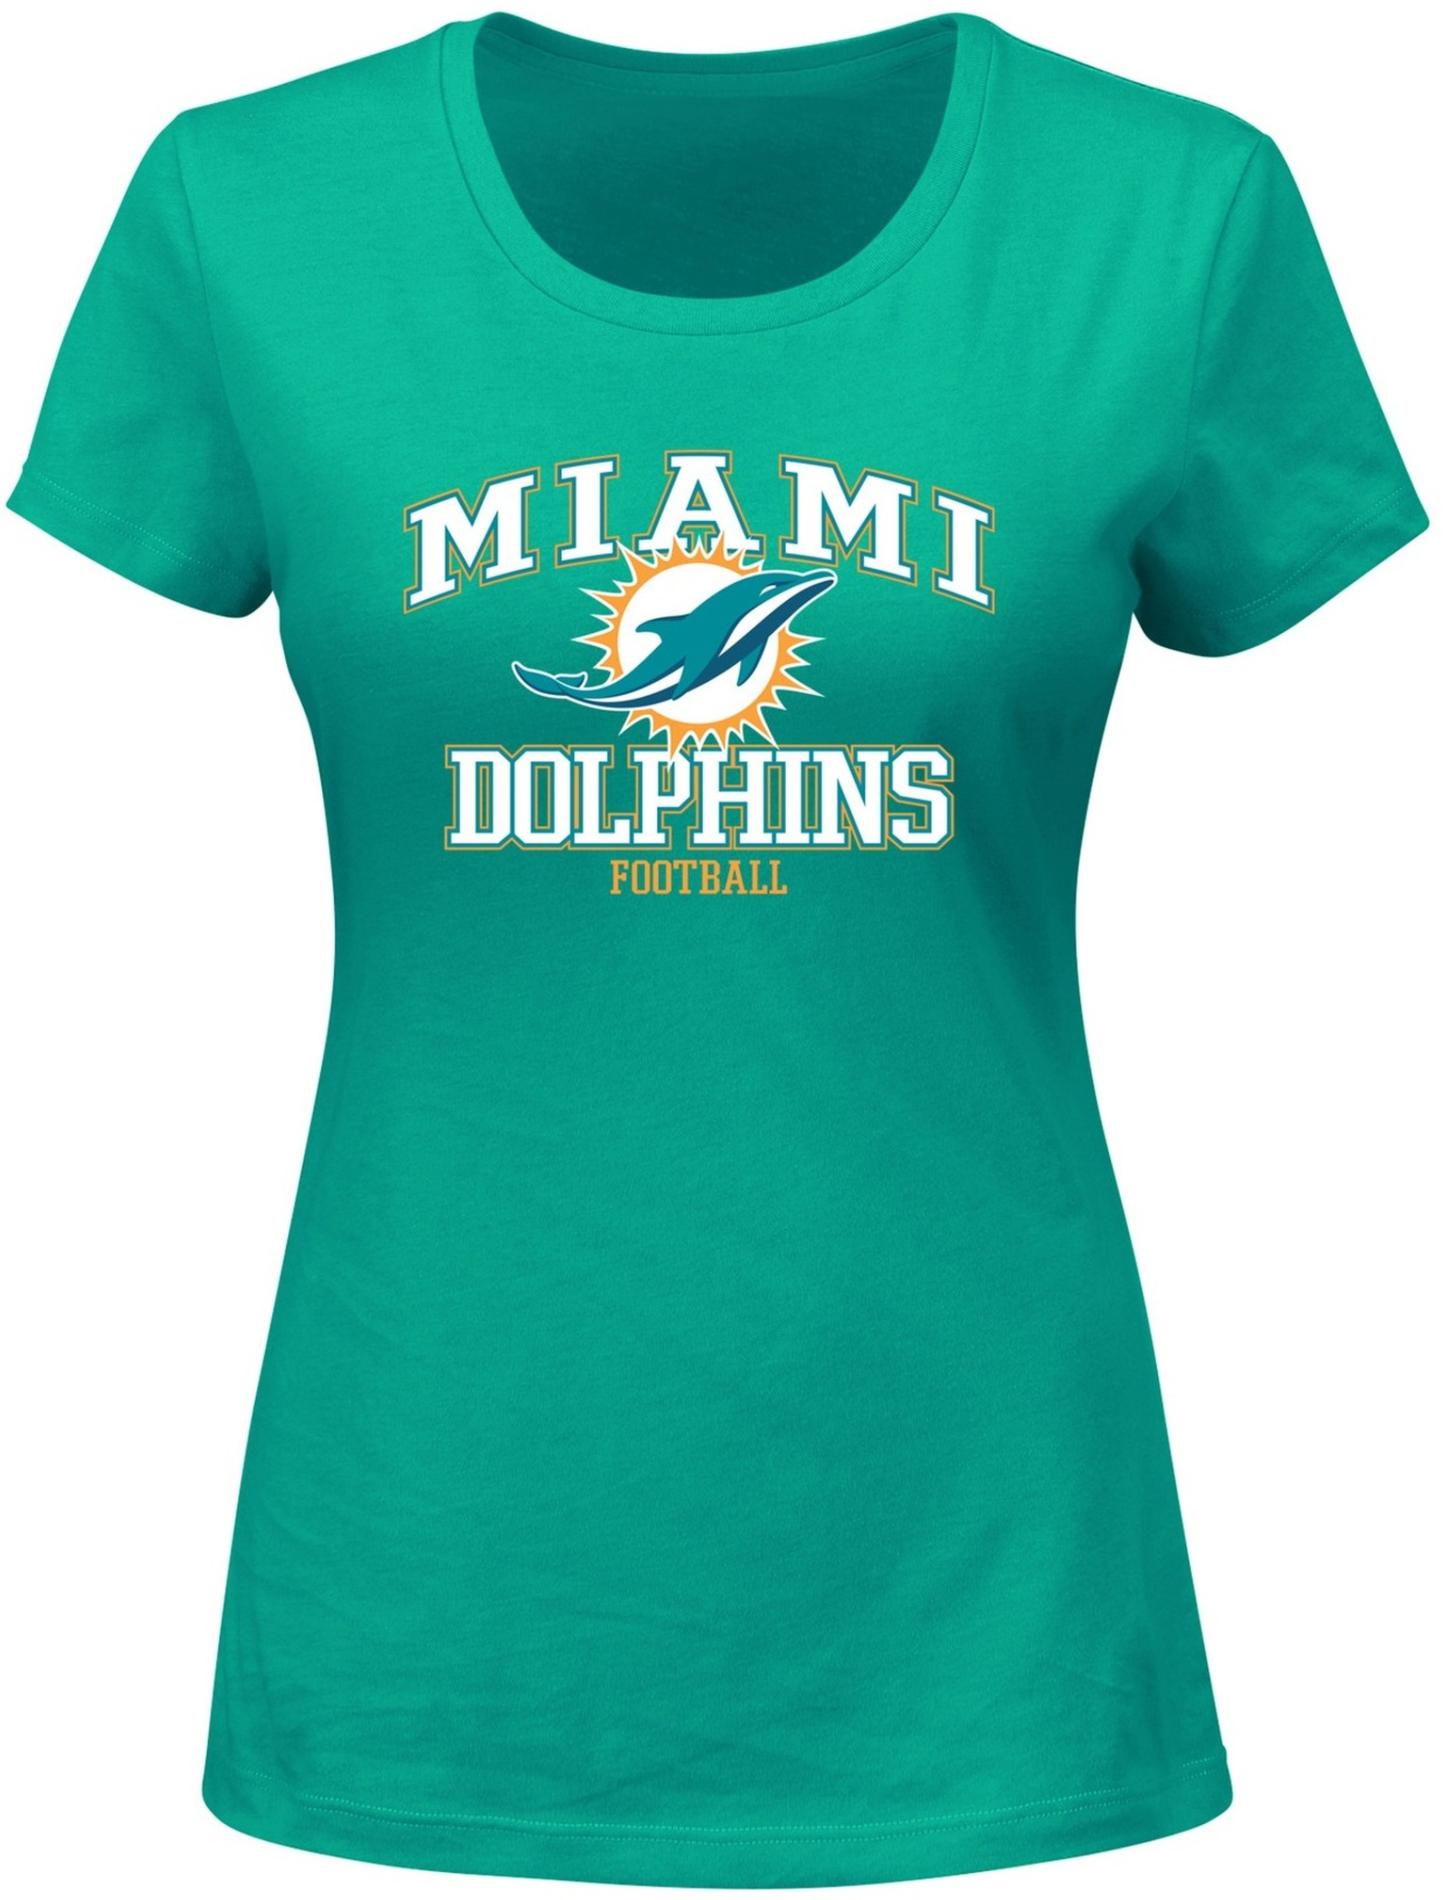 NFL Women's Graphic T-Shirt - Miami Dolphins